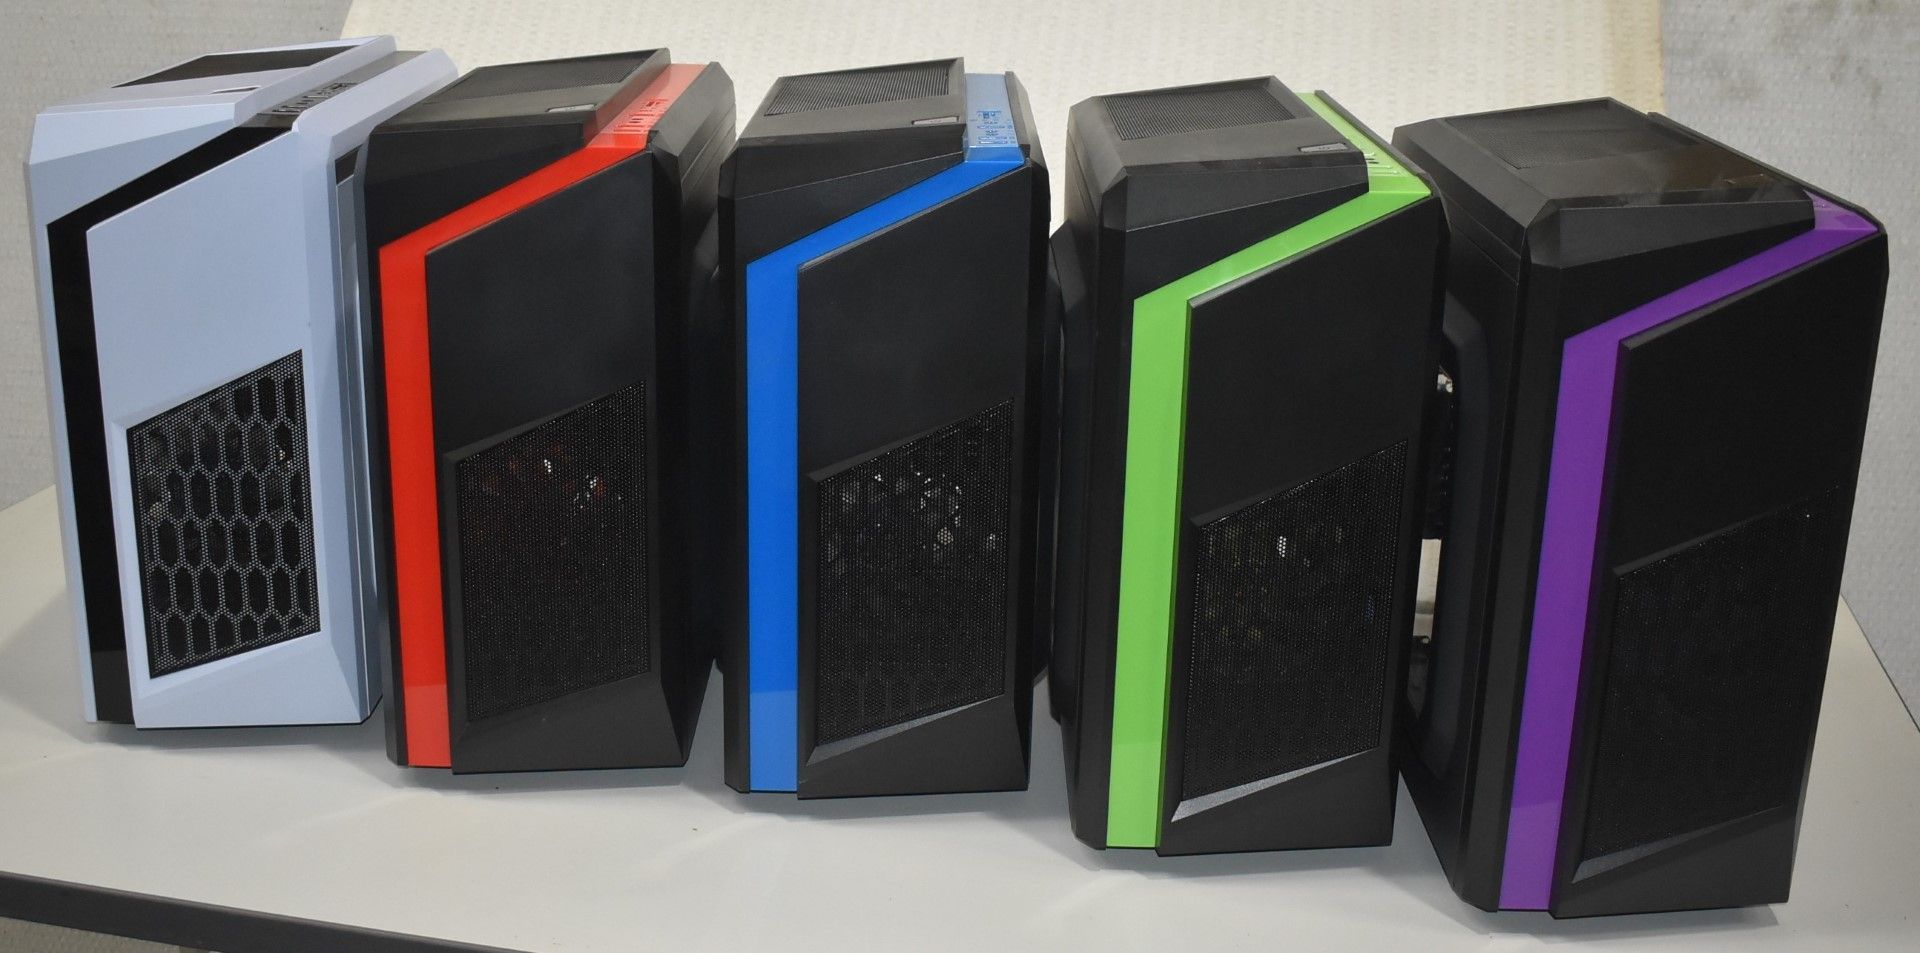 5 x ATX Computer Cases With USB 3.0, SD Card Readers, Side Window and Case Fan - Unused - Image 12 of 14